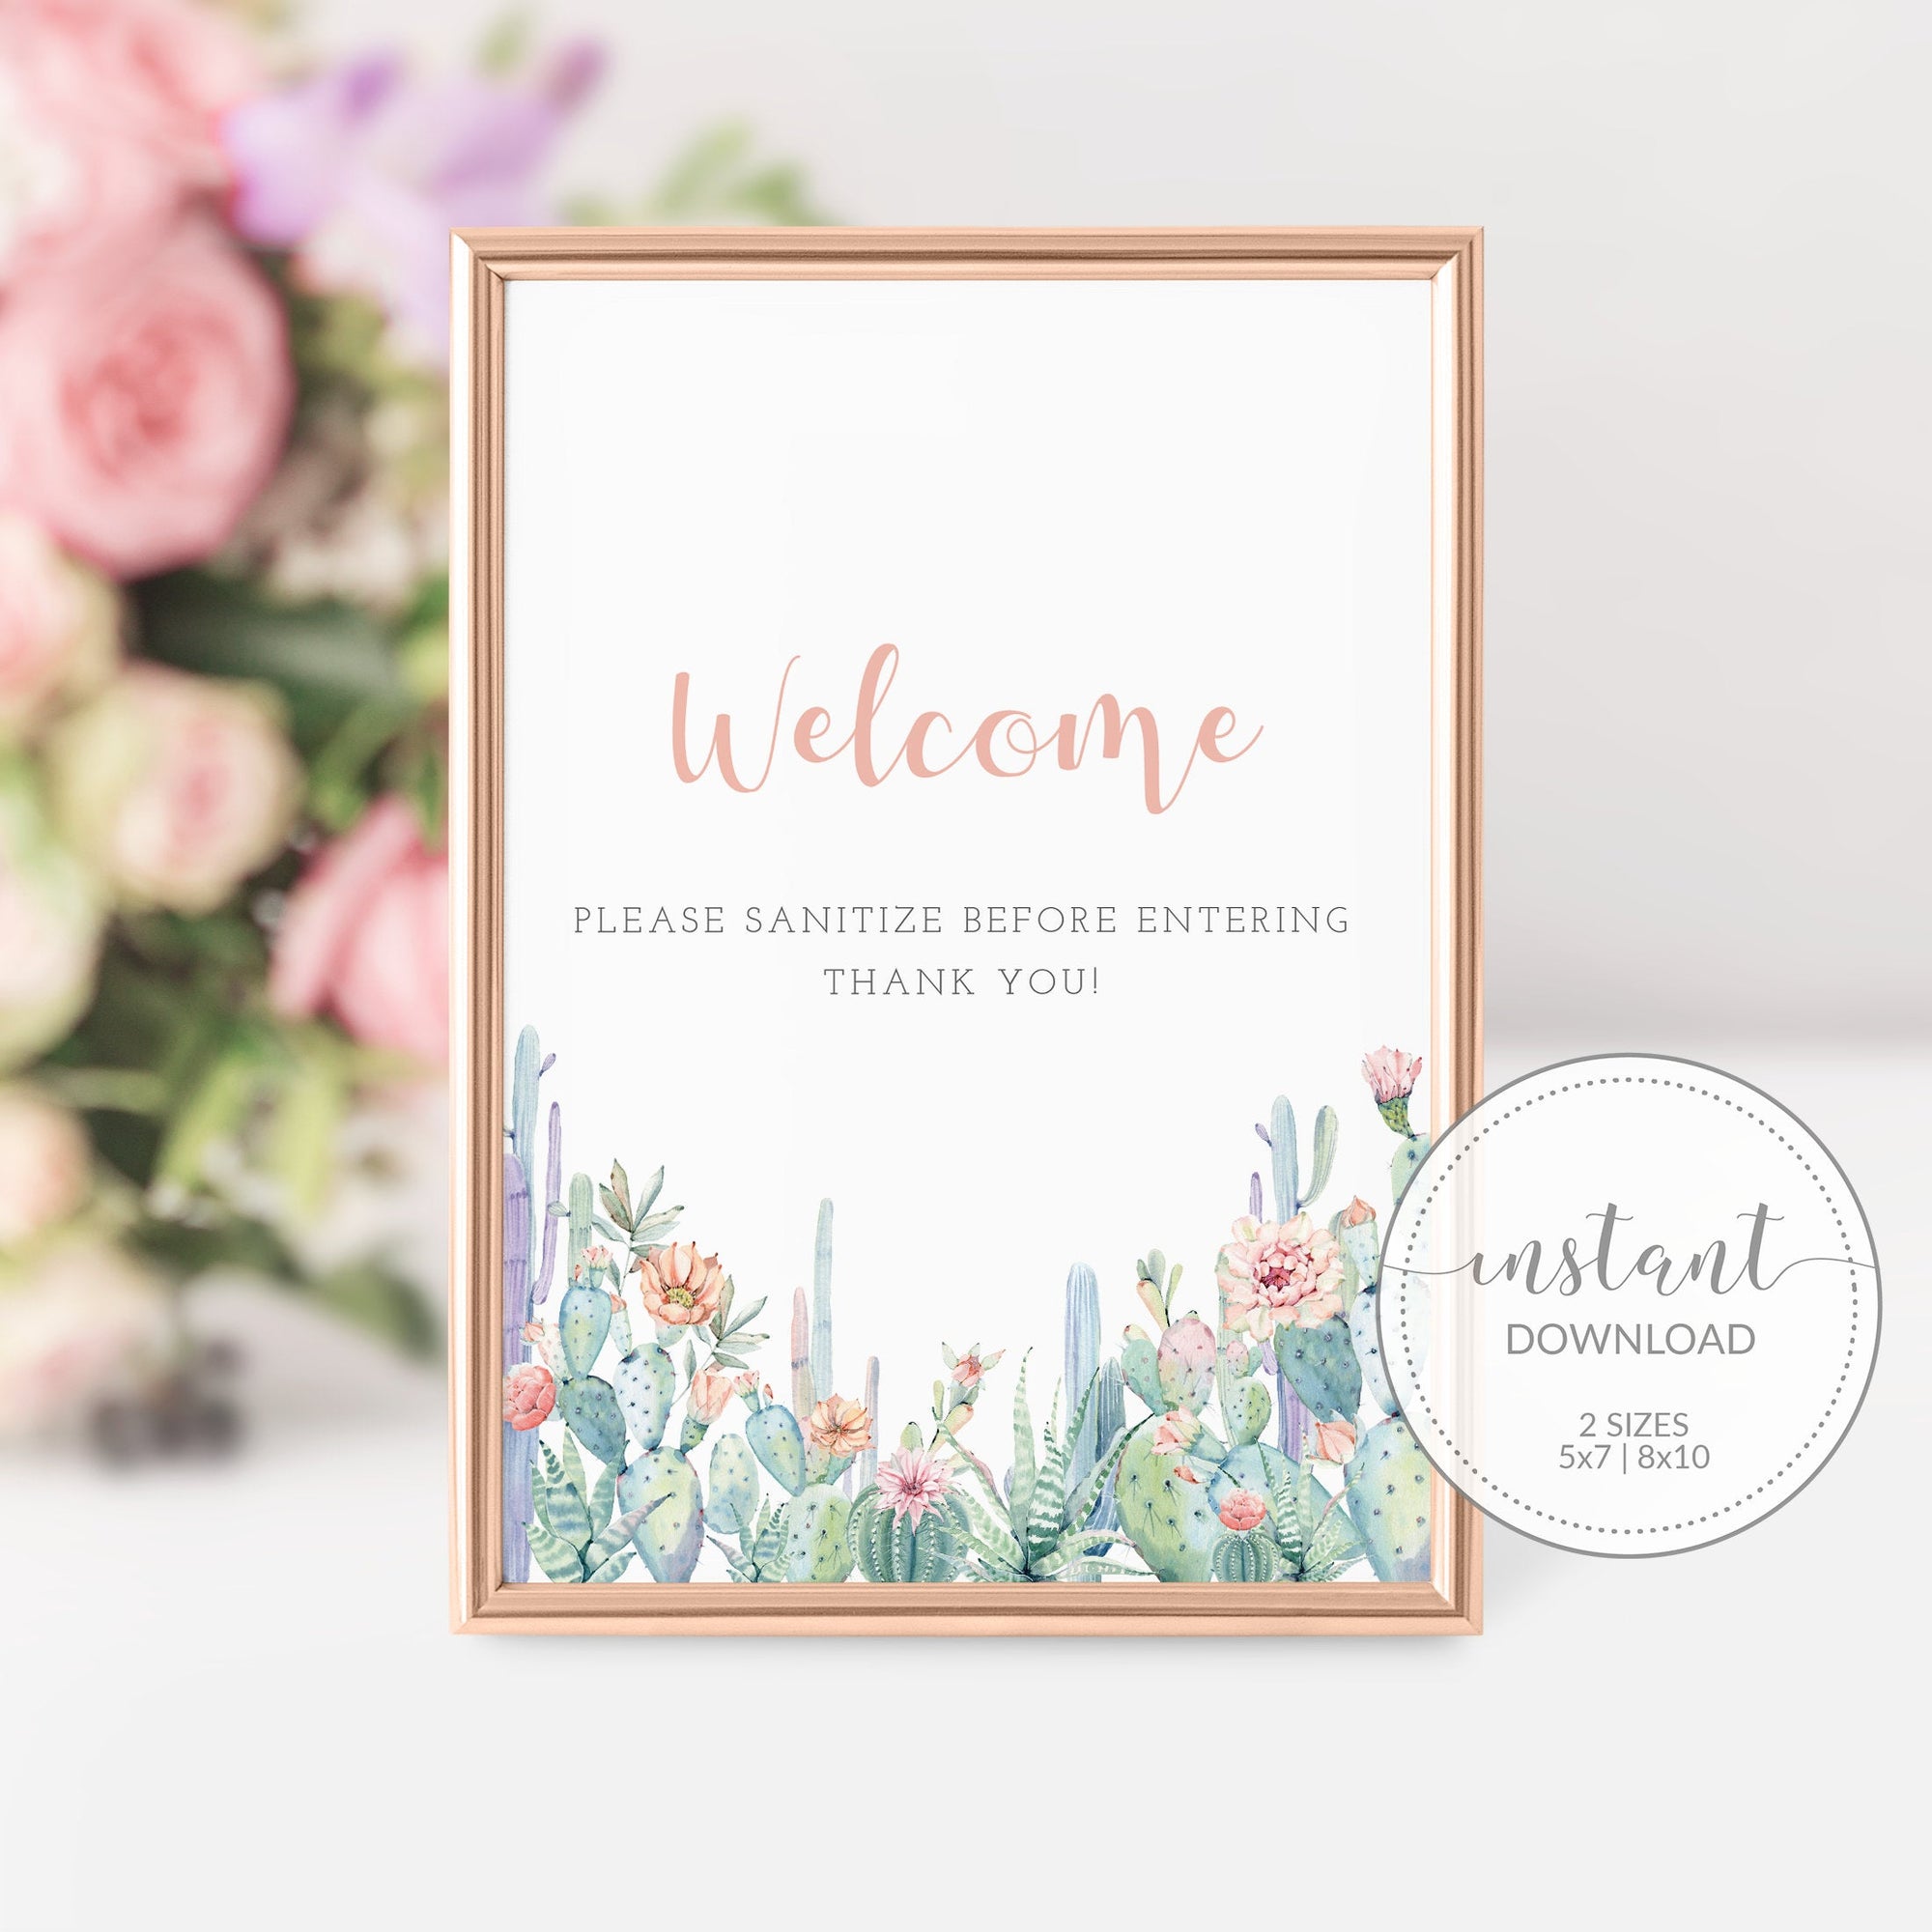 Cactus Sanitize Before Entering Sign, Printable Succulent Welcome Sign, INSTANT DOWNLOAD - CS100